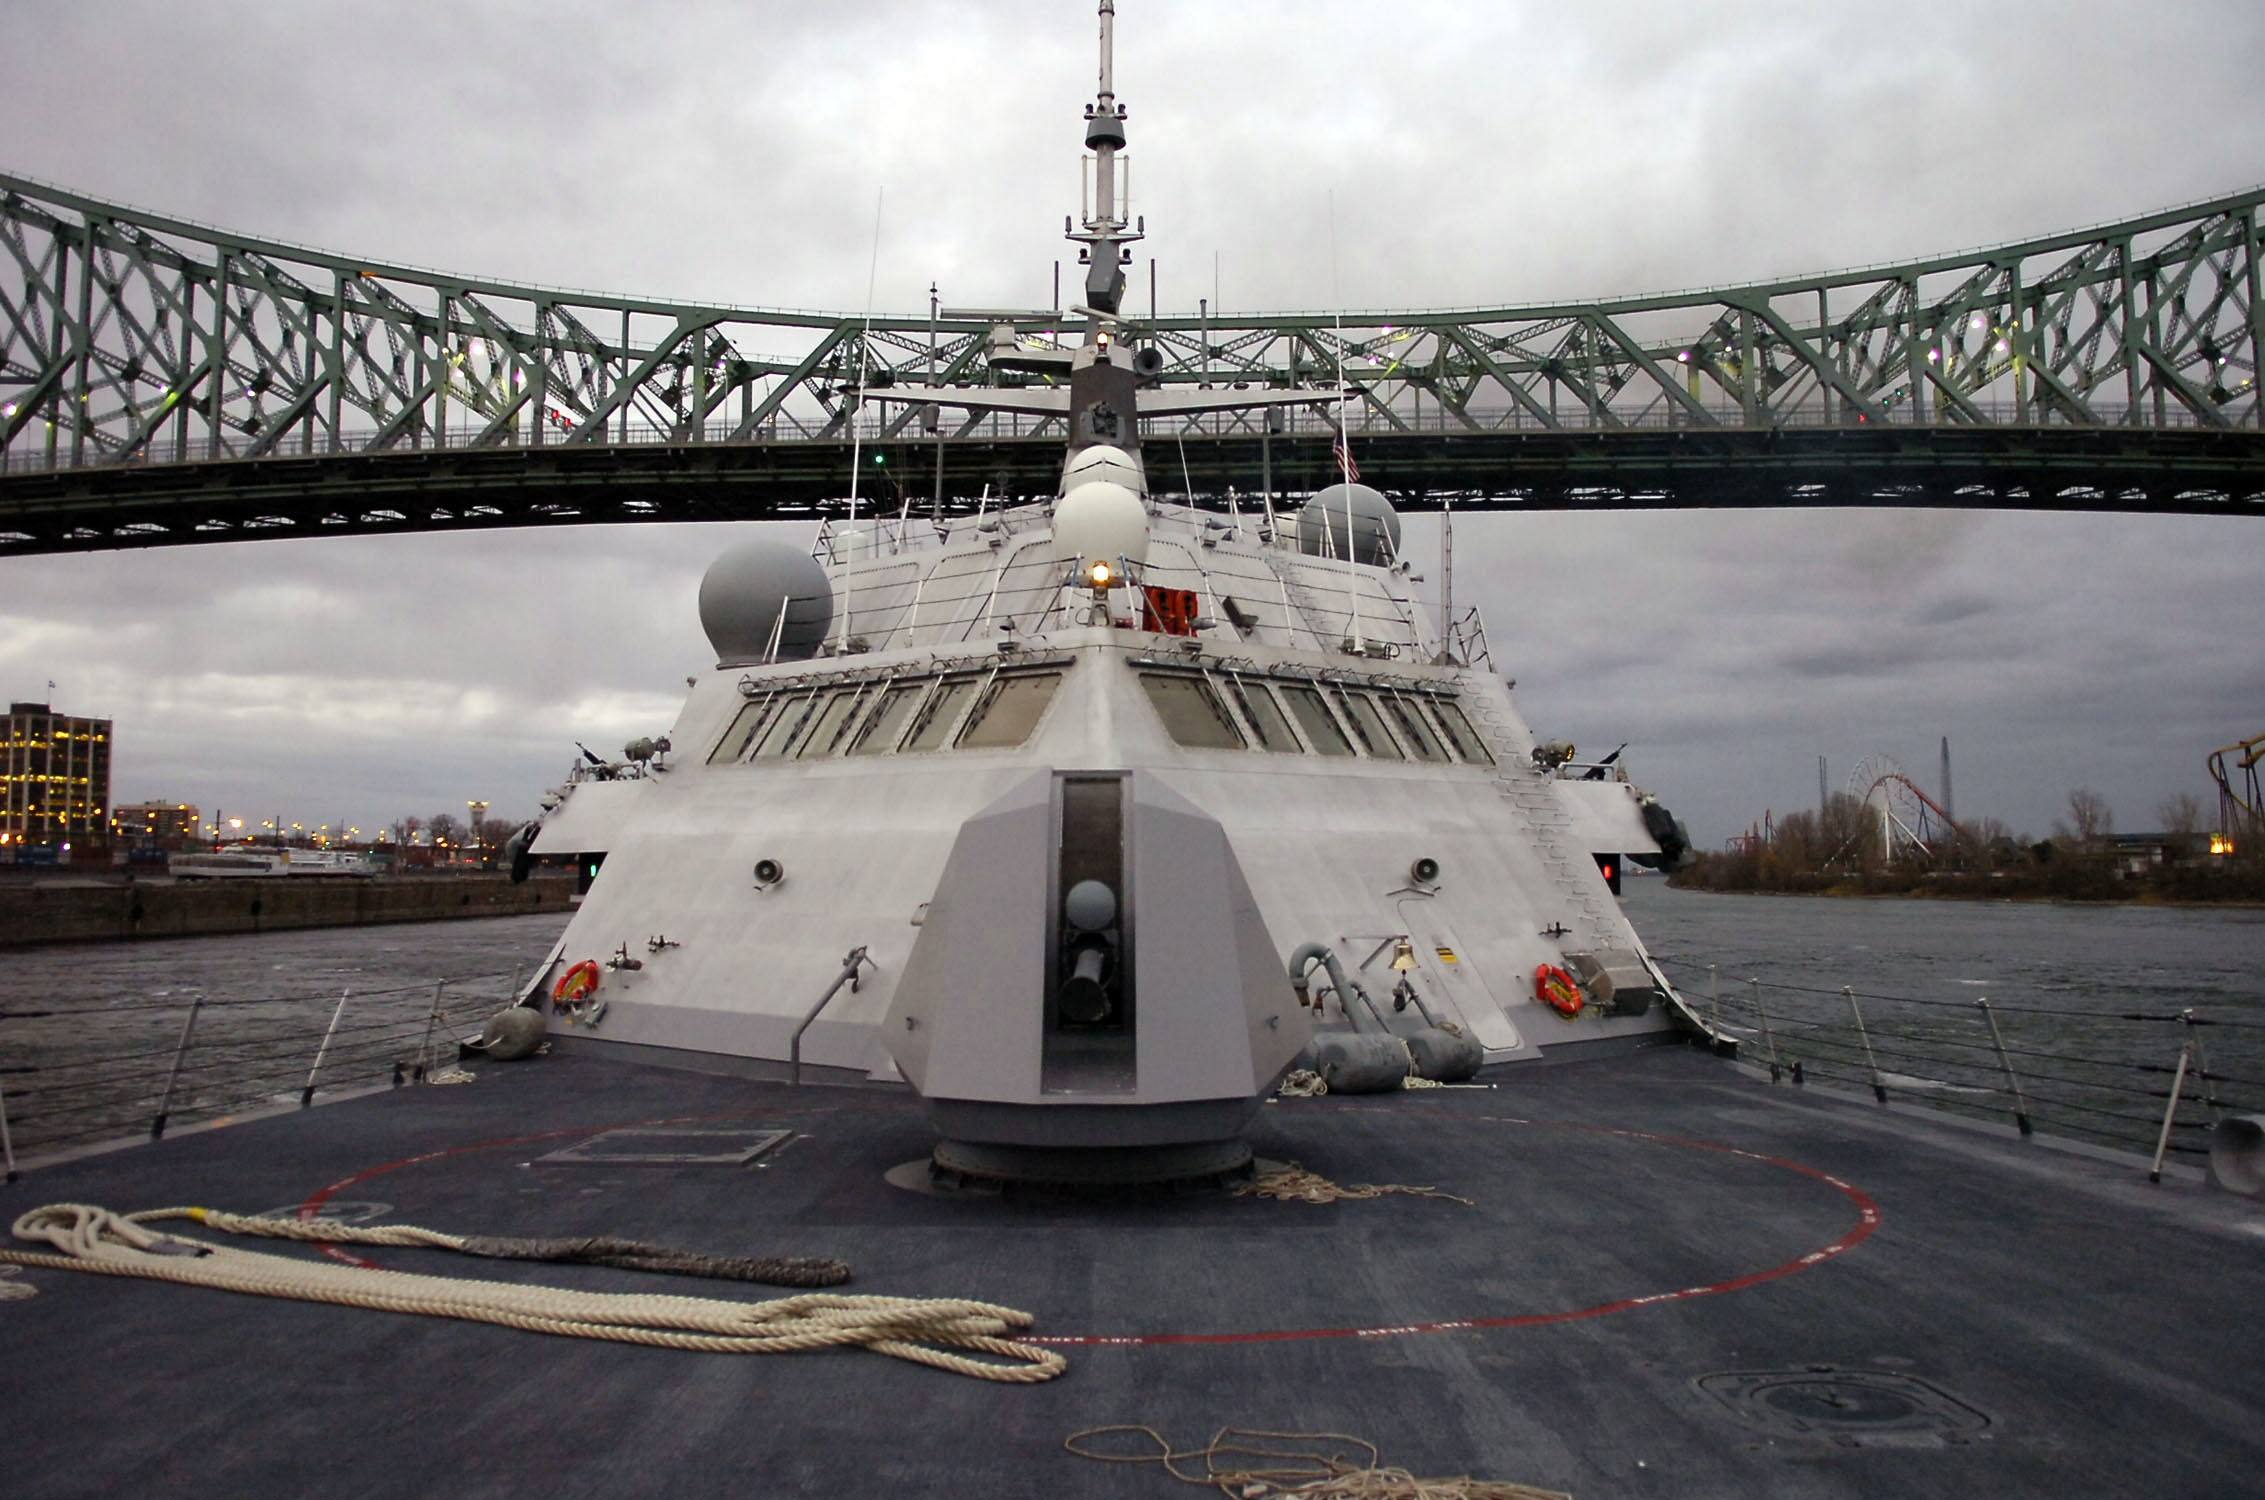 US_Navy_081120-N-5758H-471_USS_Freedom_(LCS_1)_Freedom_sails_under_the_Pont_Jacques-Cartier_Bridge.jpg  by LordDUnivers